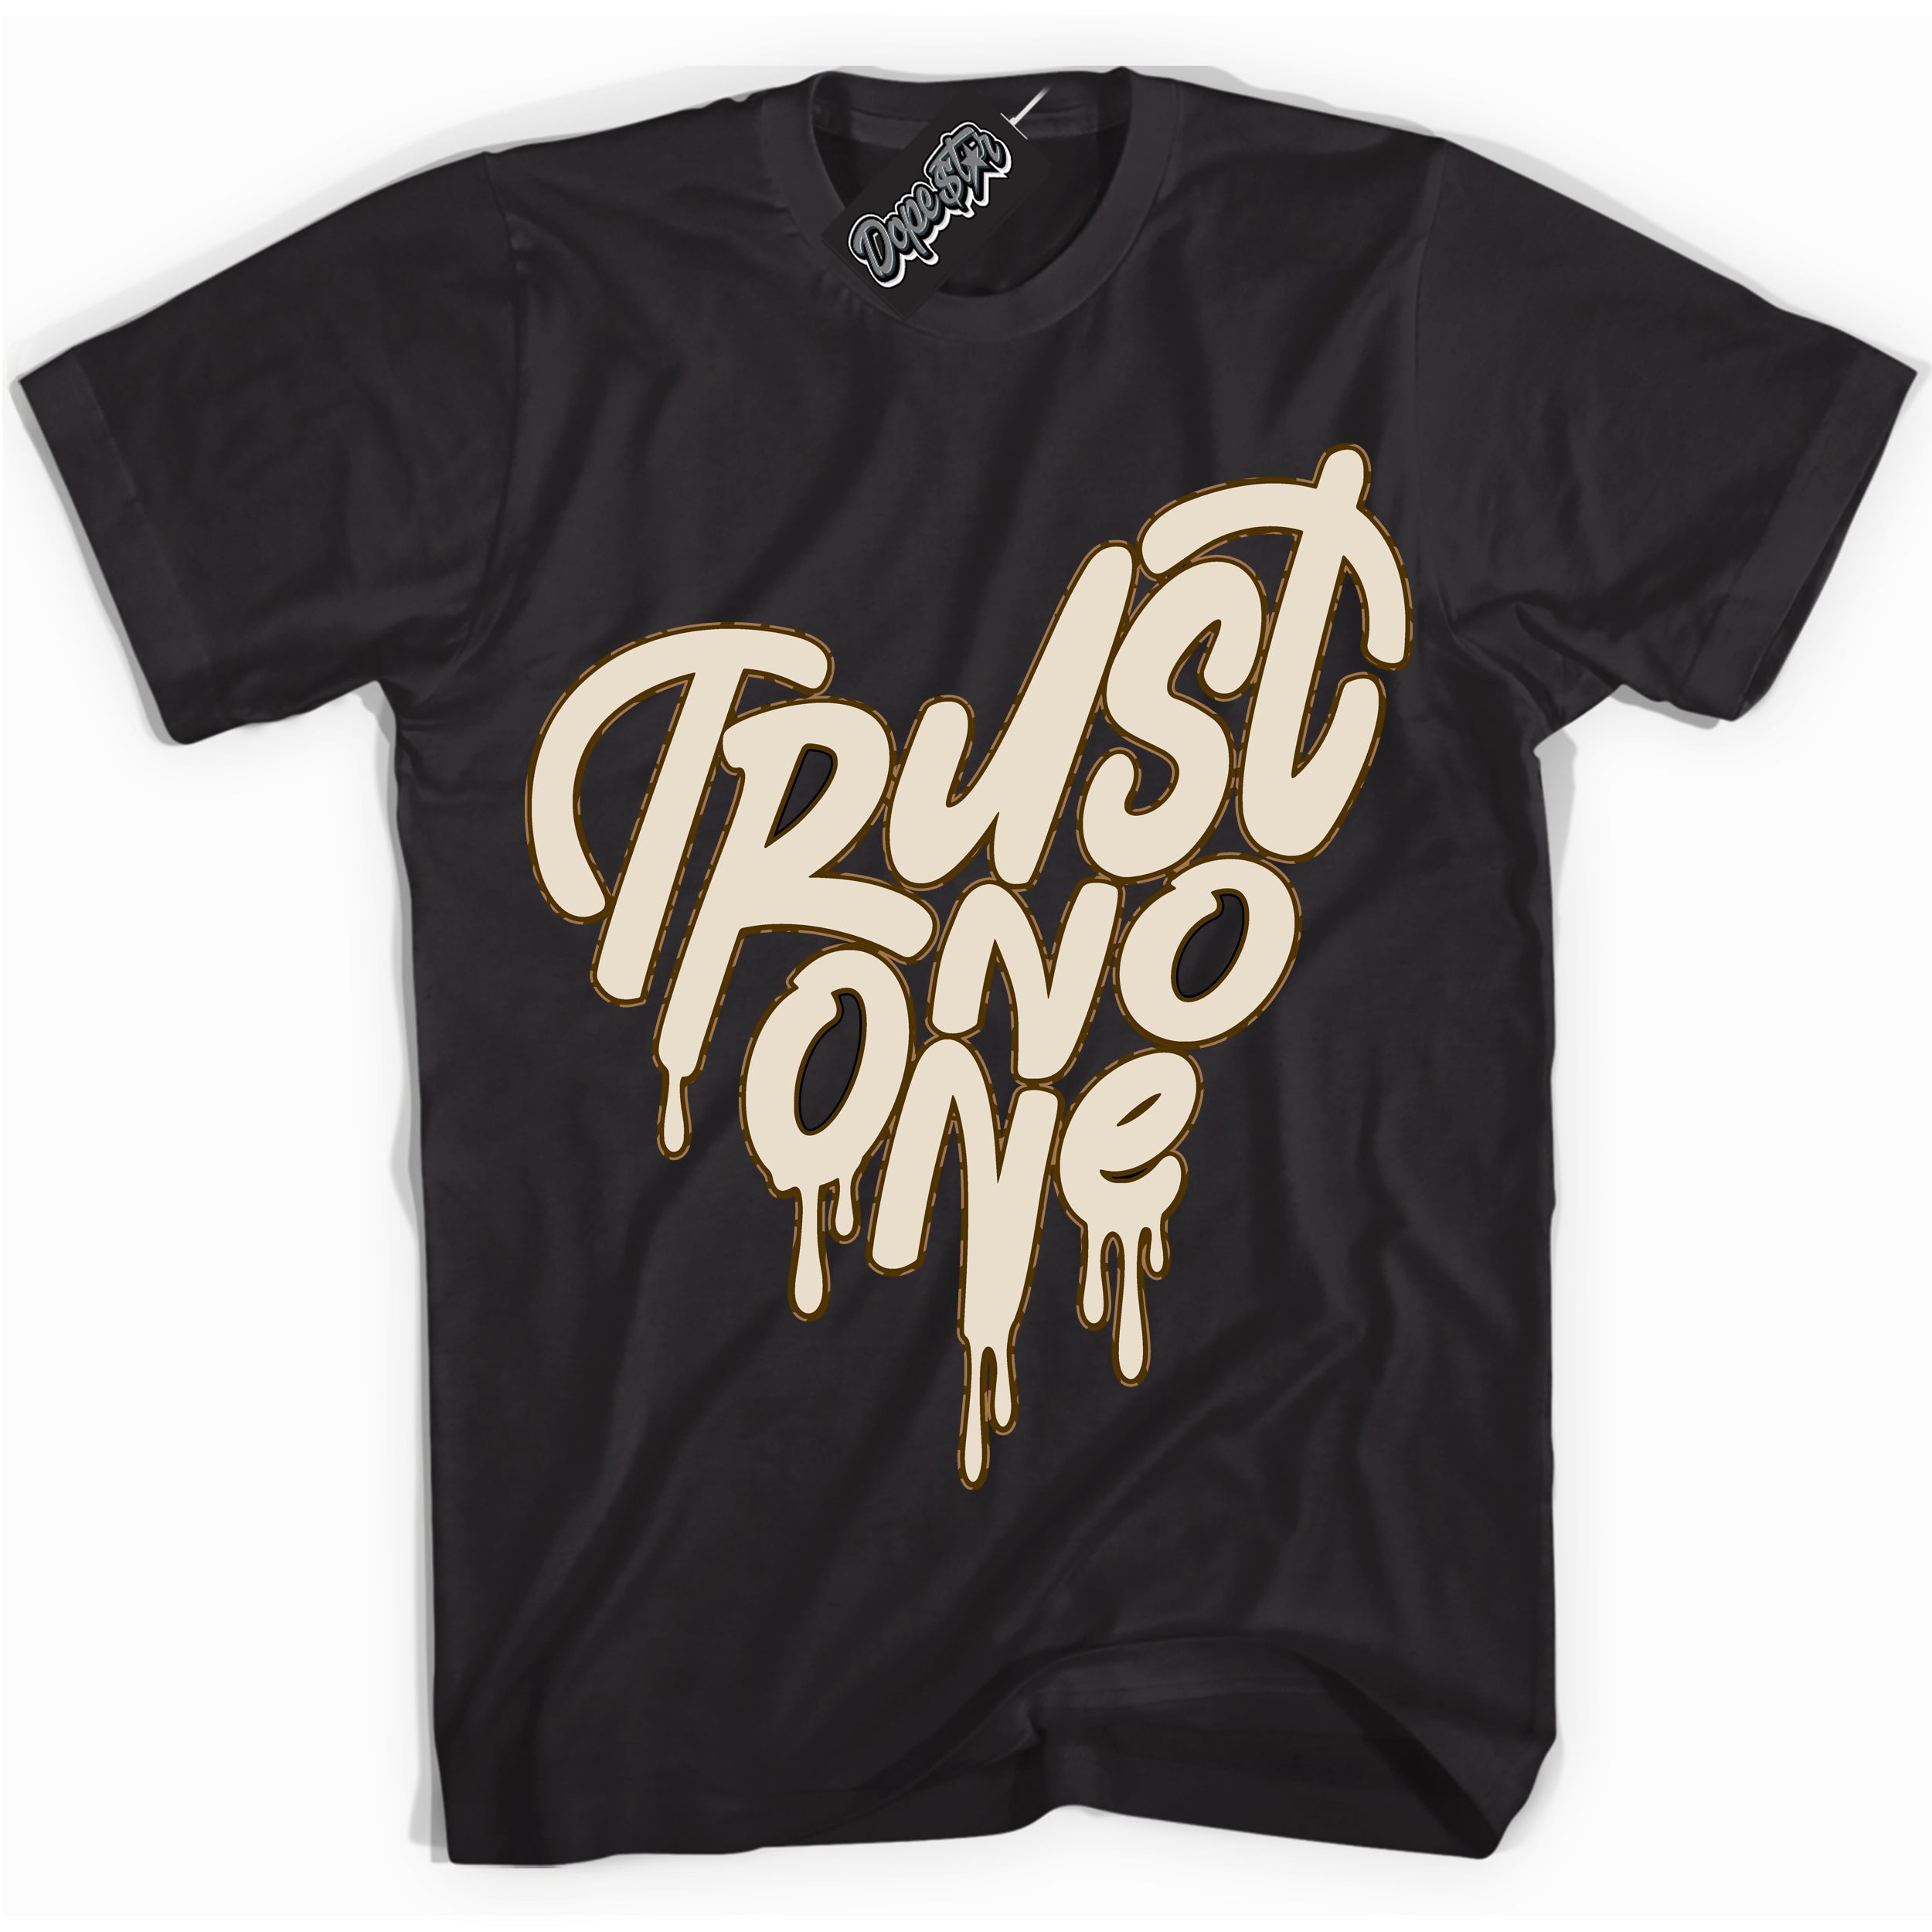 Cool Black graphic tee with “ Trust No One Heart ” design, that perfectly matches Palomino 3s sneakers Cool White graphic tee with “ Trust No One Heart ” design, that perfectly matches Palomino 3s sneakers 